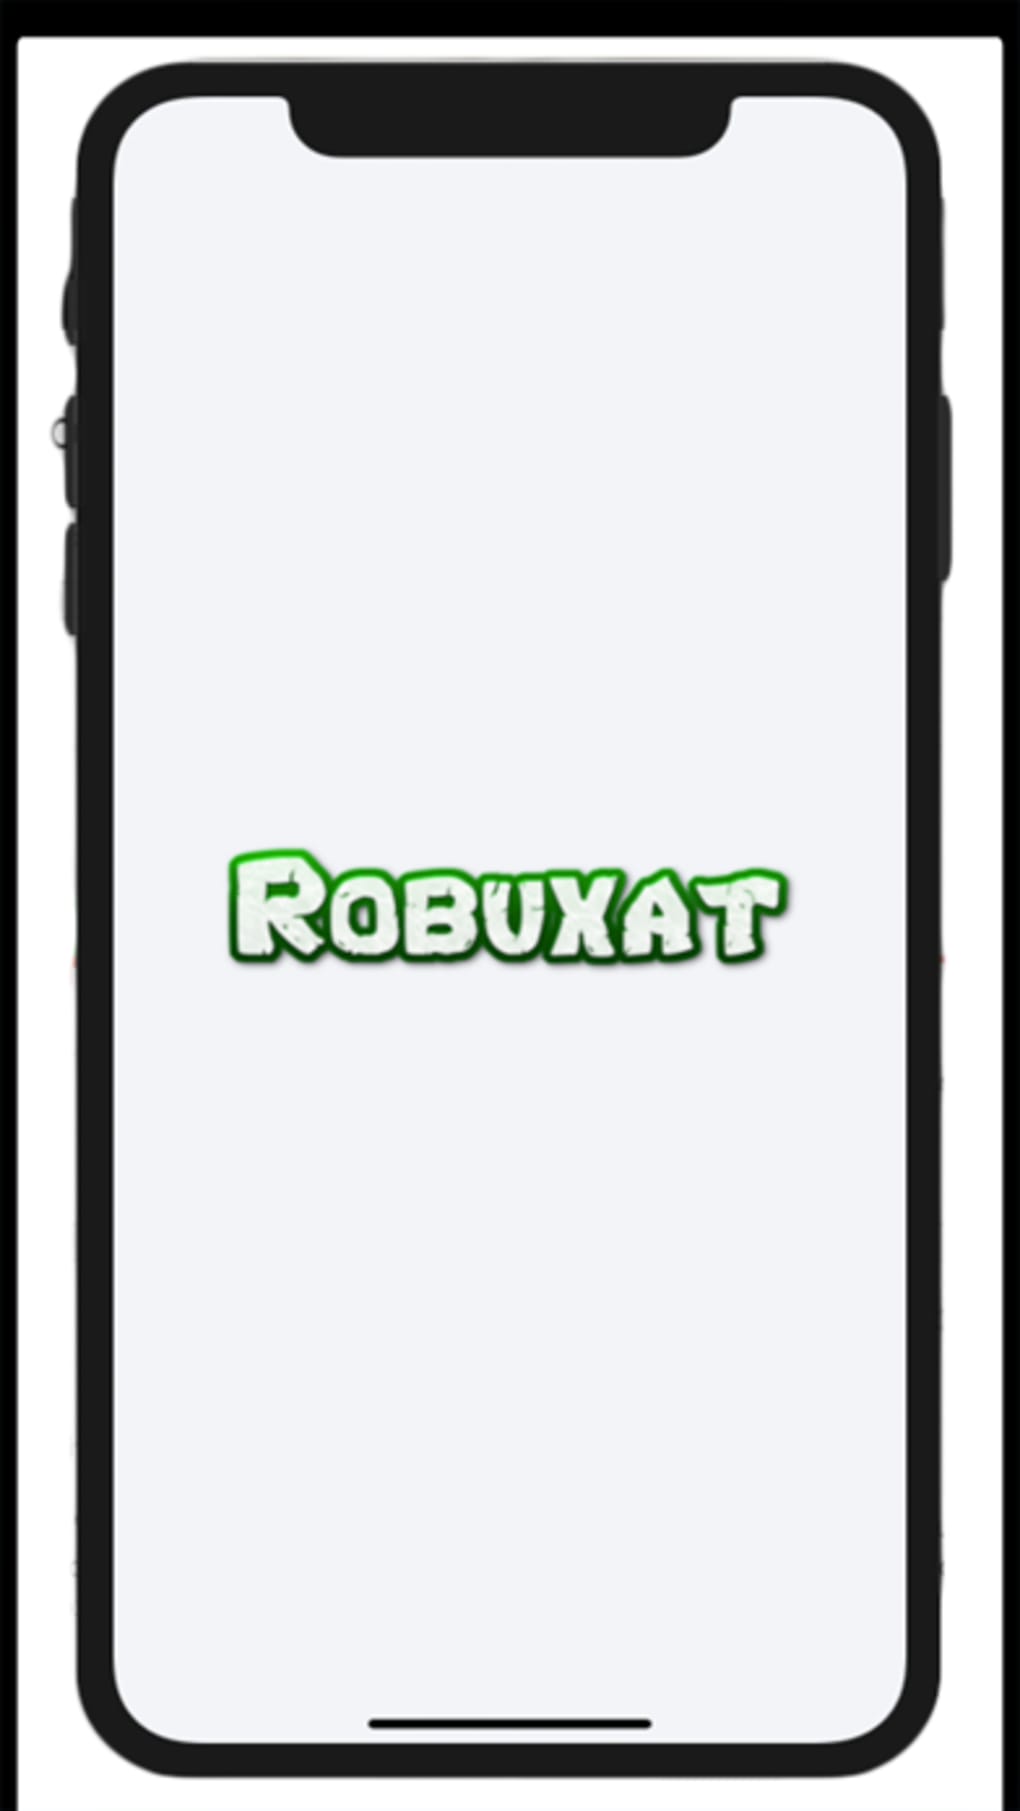 Robux For Roblox Robuxat For Iphone Download - robux for roblox robuxat for iphone download